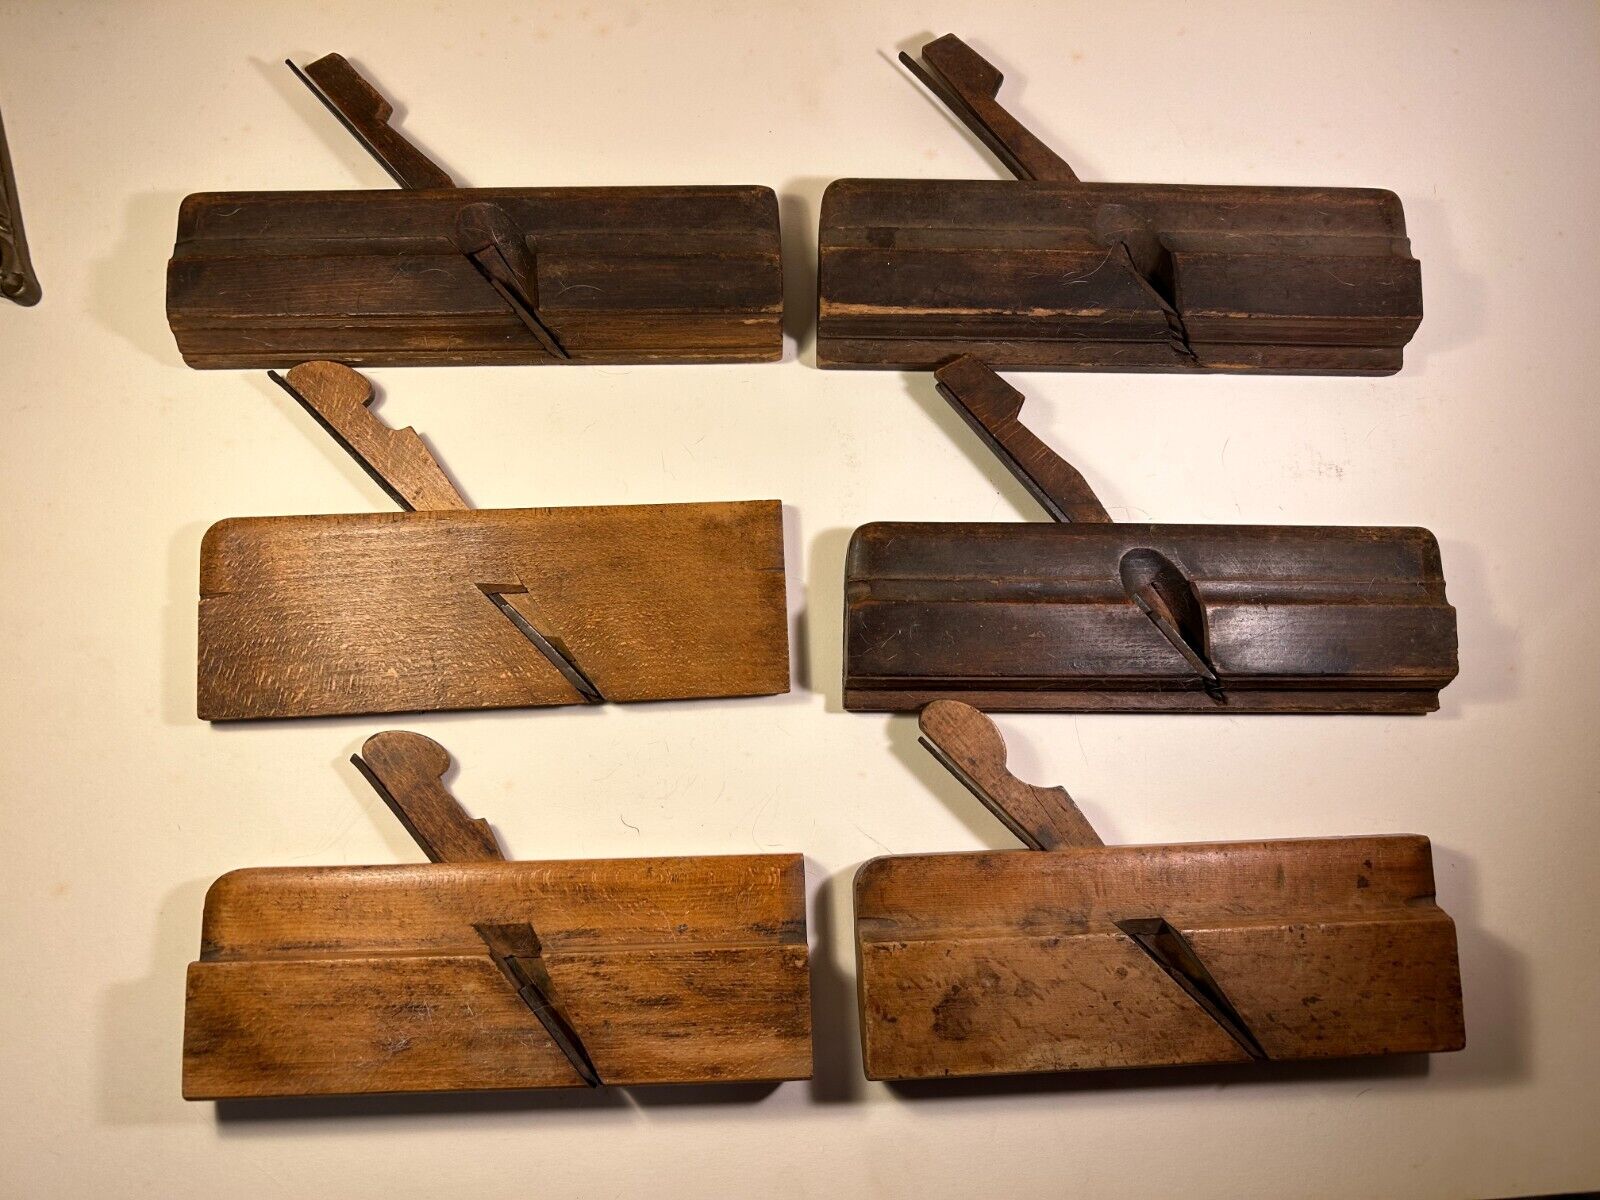 6 Vintage Antique Wooden Moulding Plane Carpentry Woodworking Hand Tools 1880s